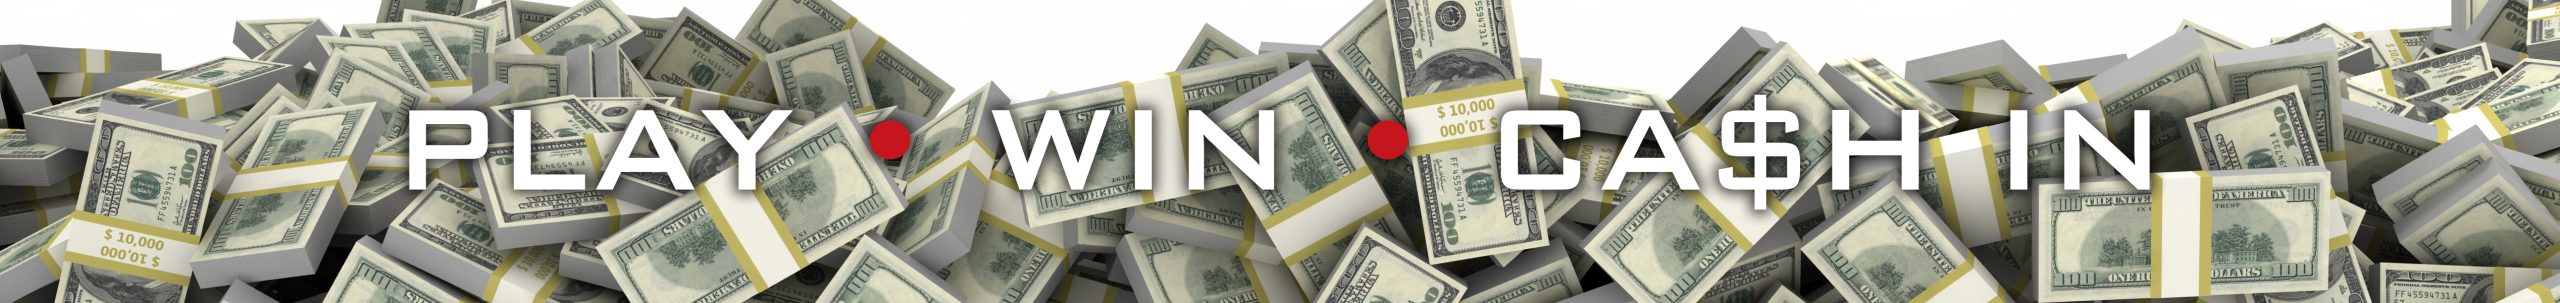 Play, win, and cash in at Prairie Wind Casino